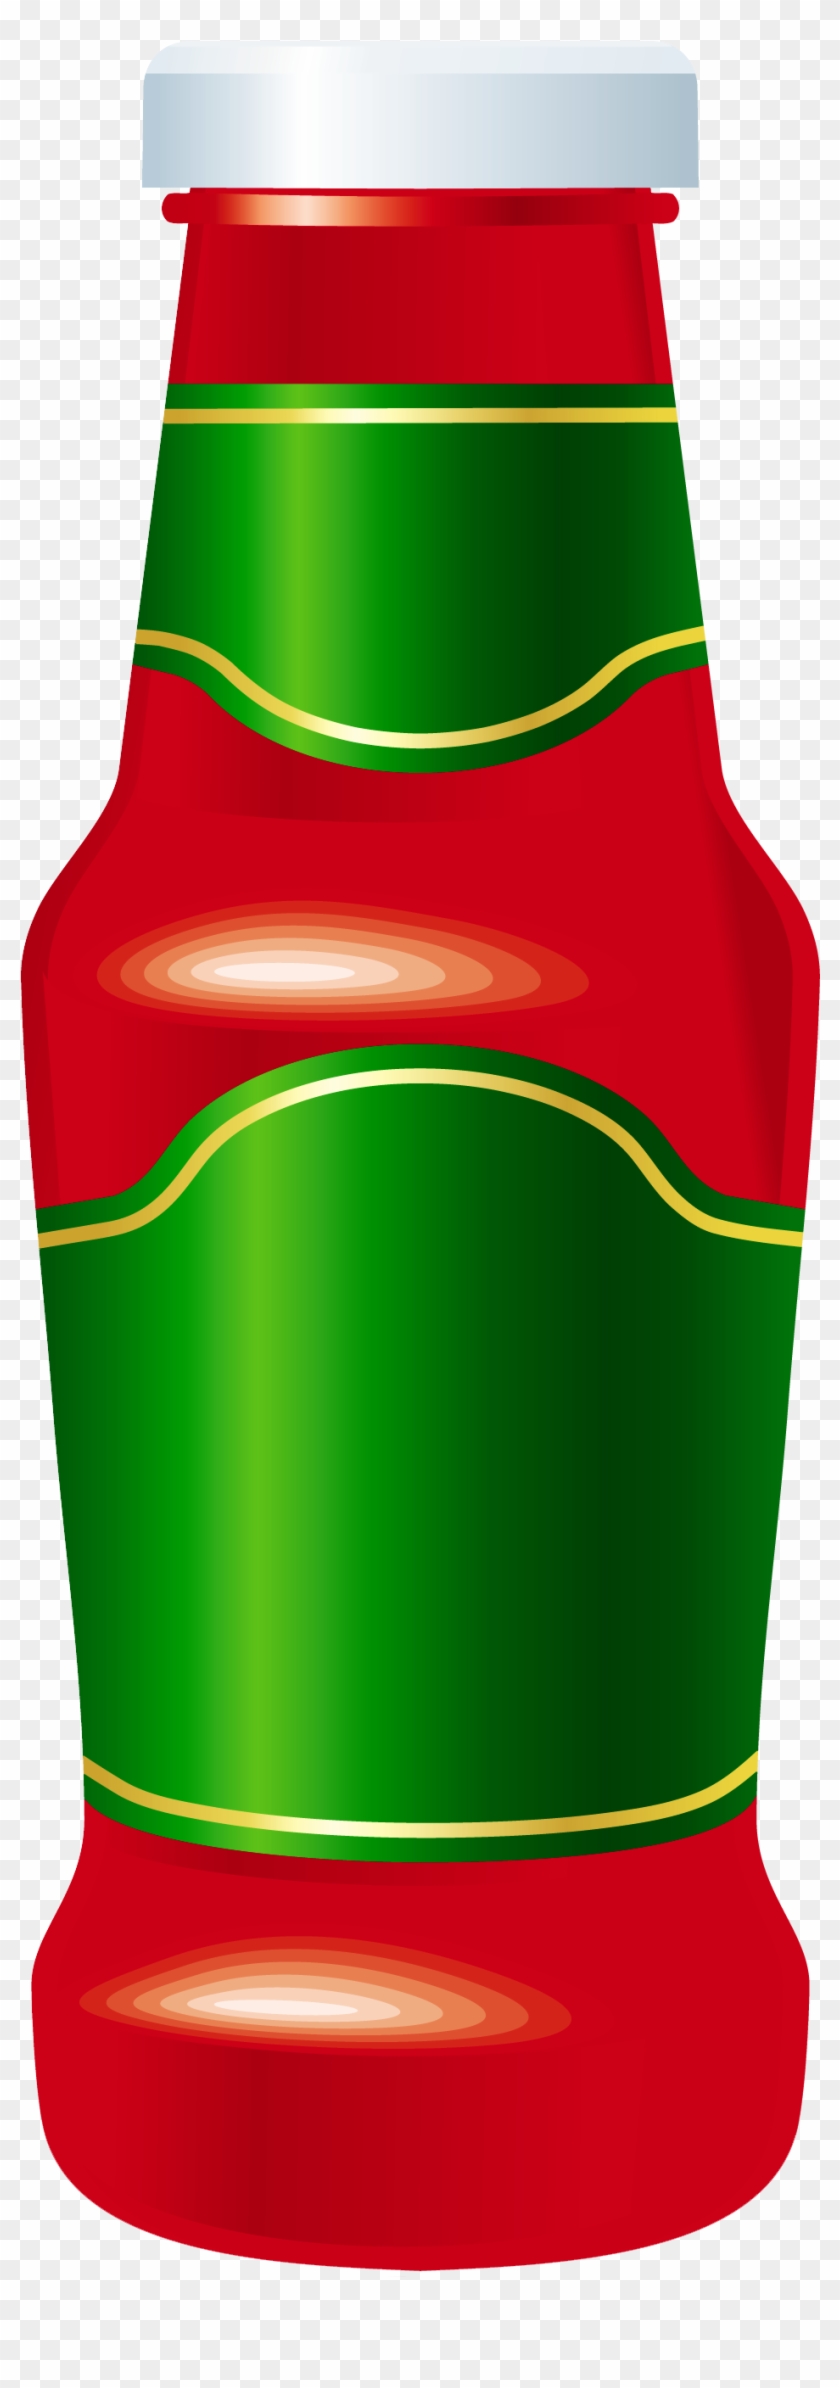 Ketchup Bottle Png Clipart Image - Ketchup Clipart Png #310044